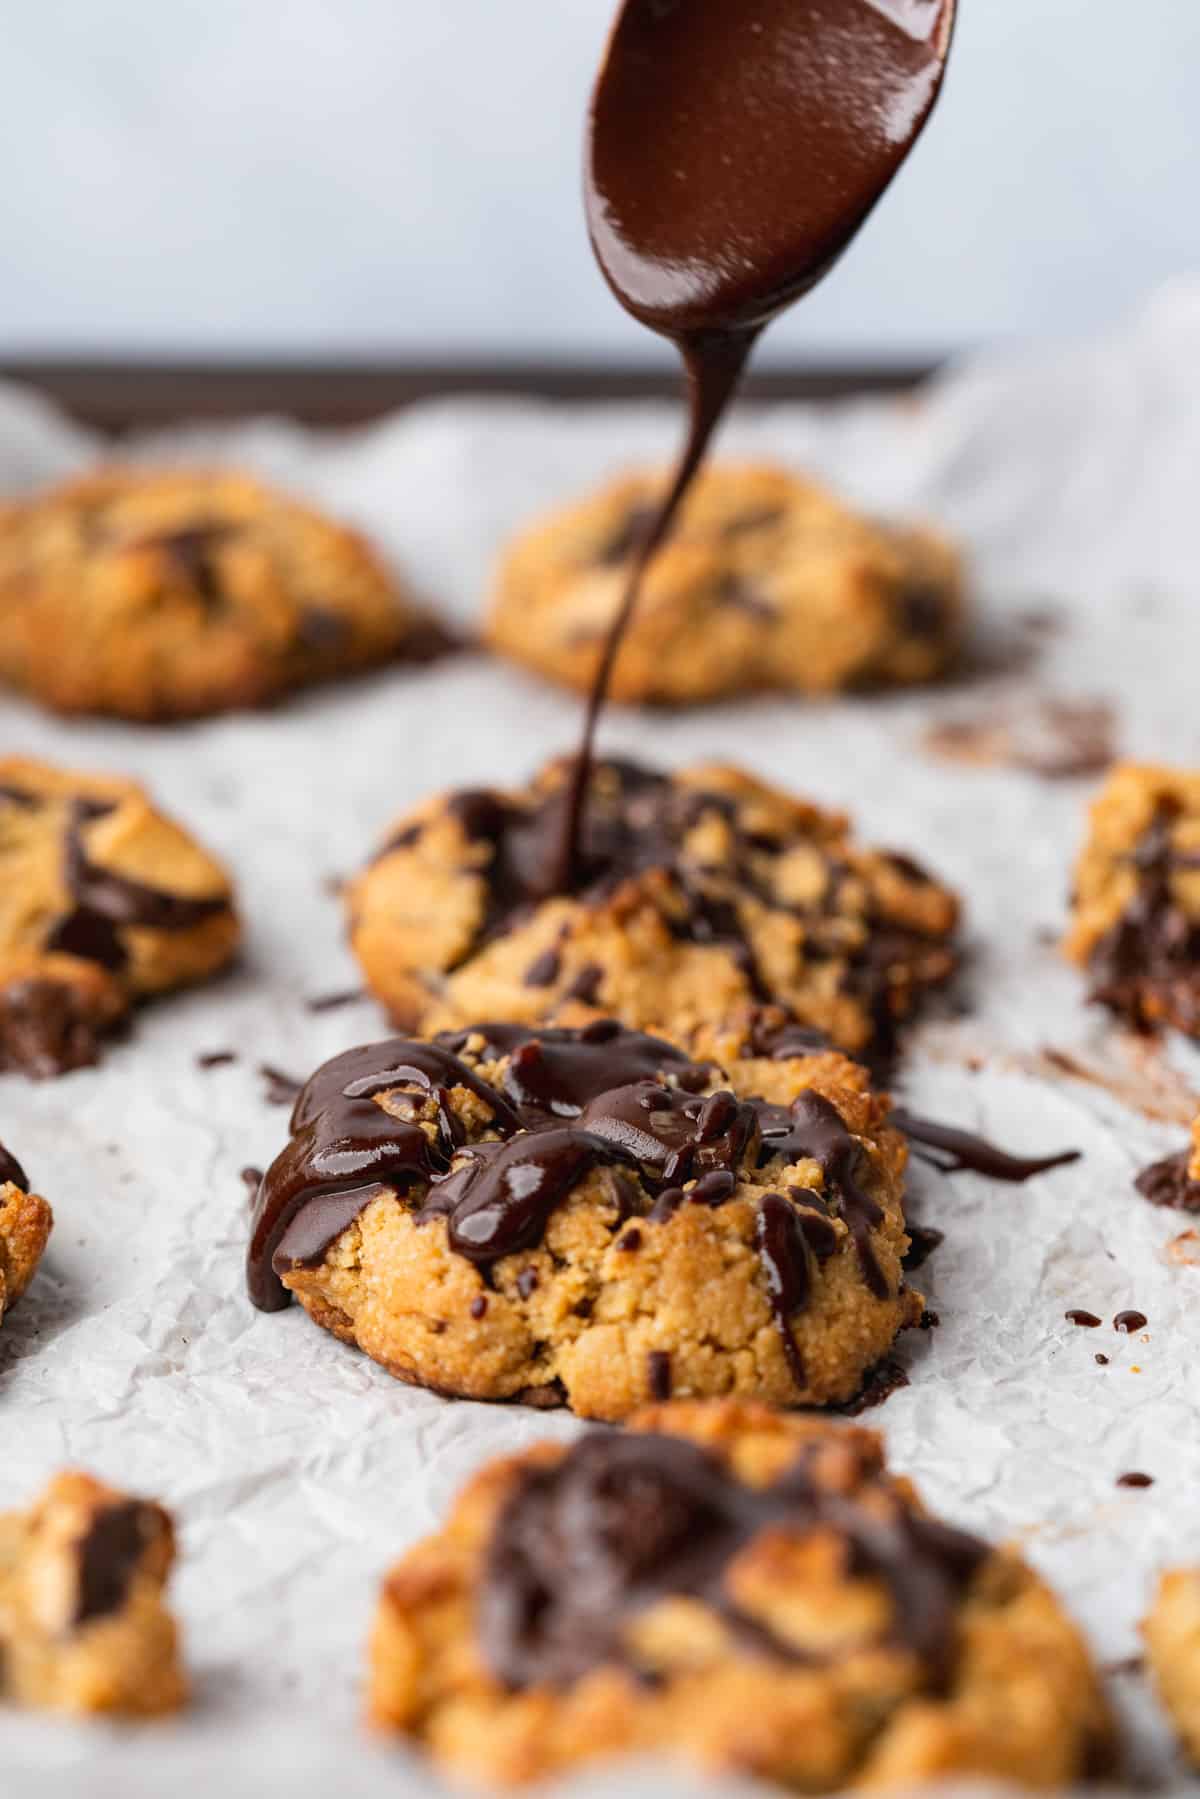 spoonful of chocolate drizzle going on top of a large keto peanut butter chocolate chip cookie